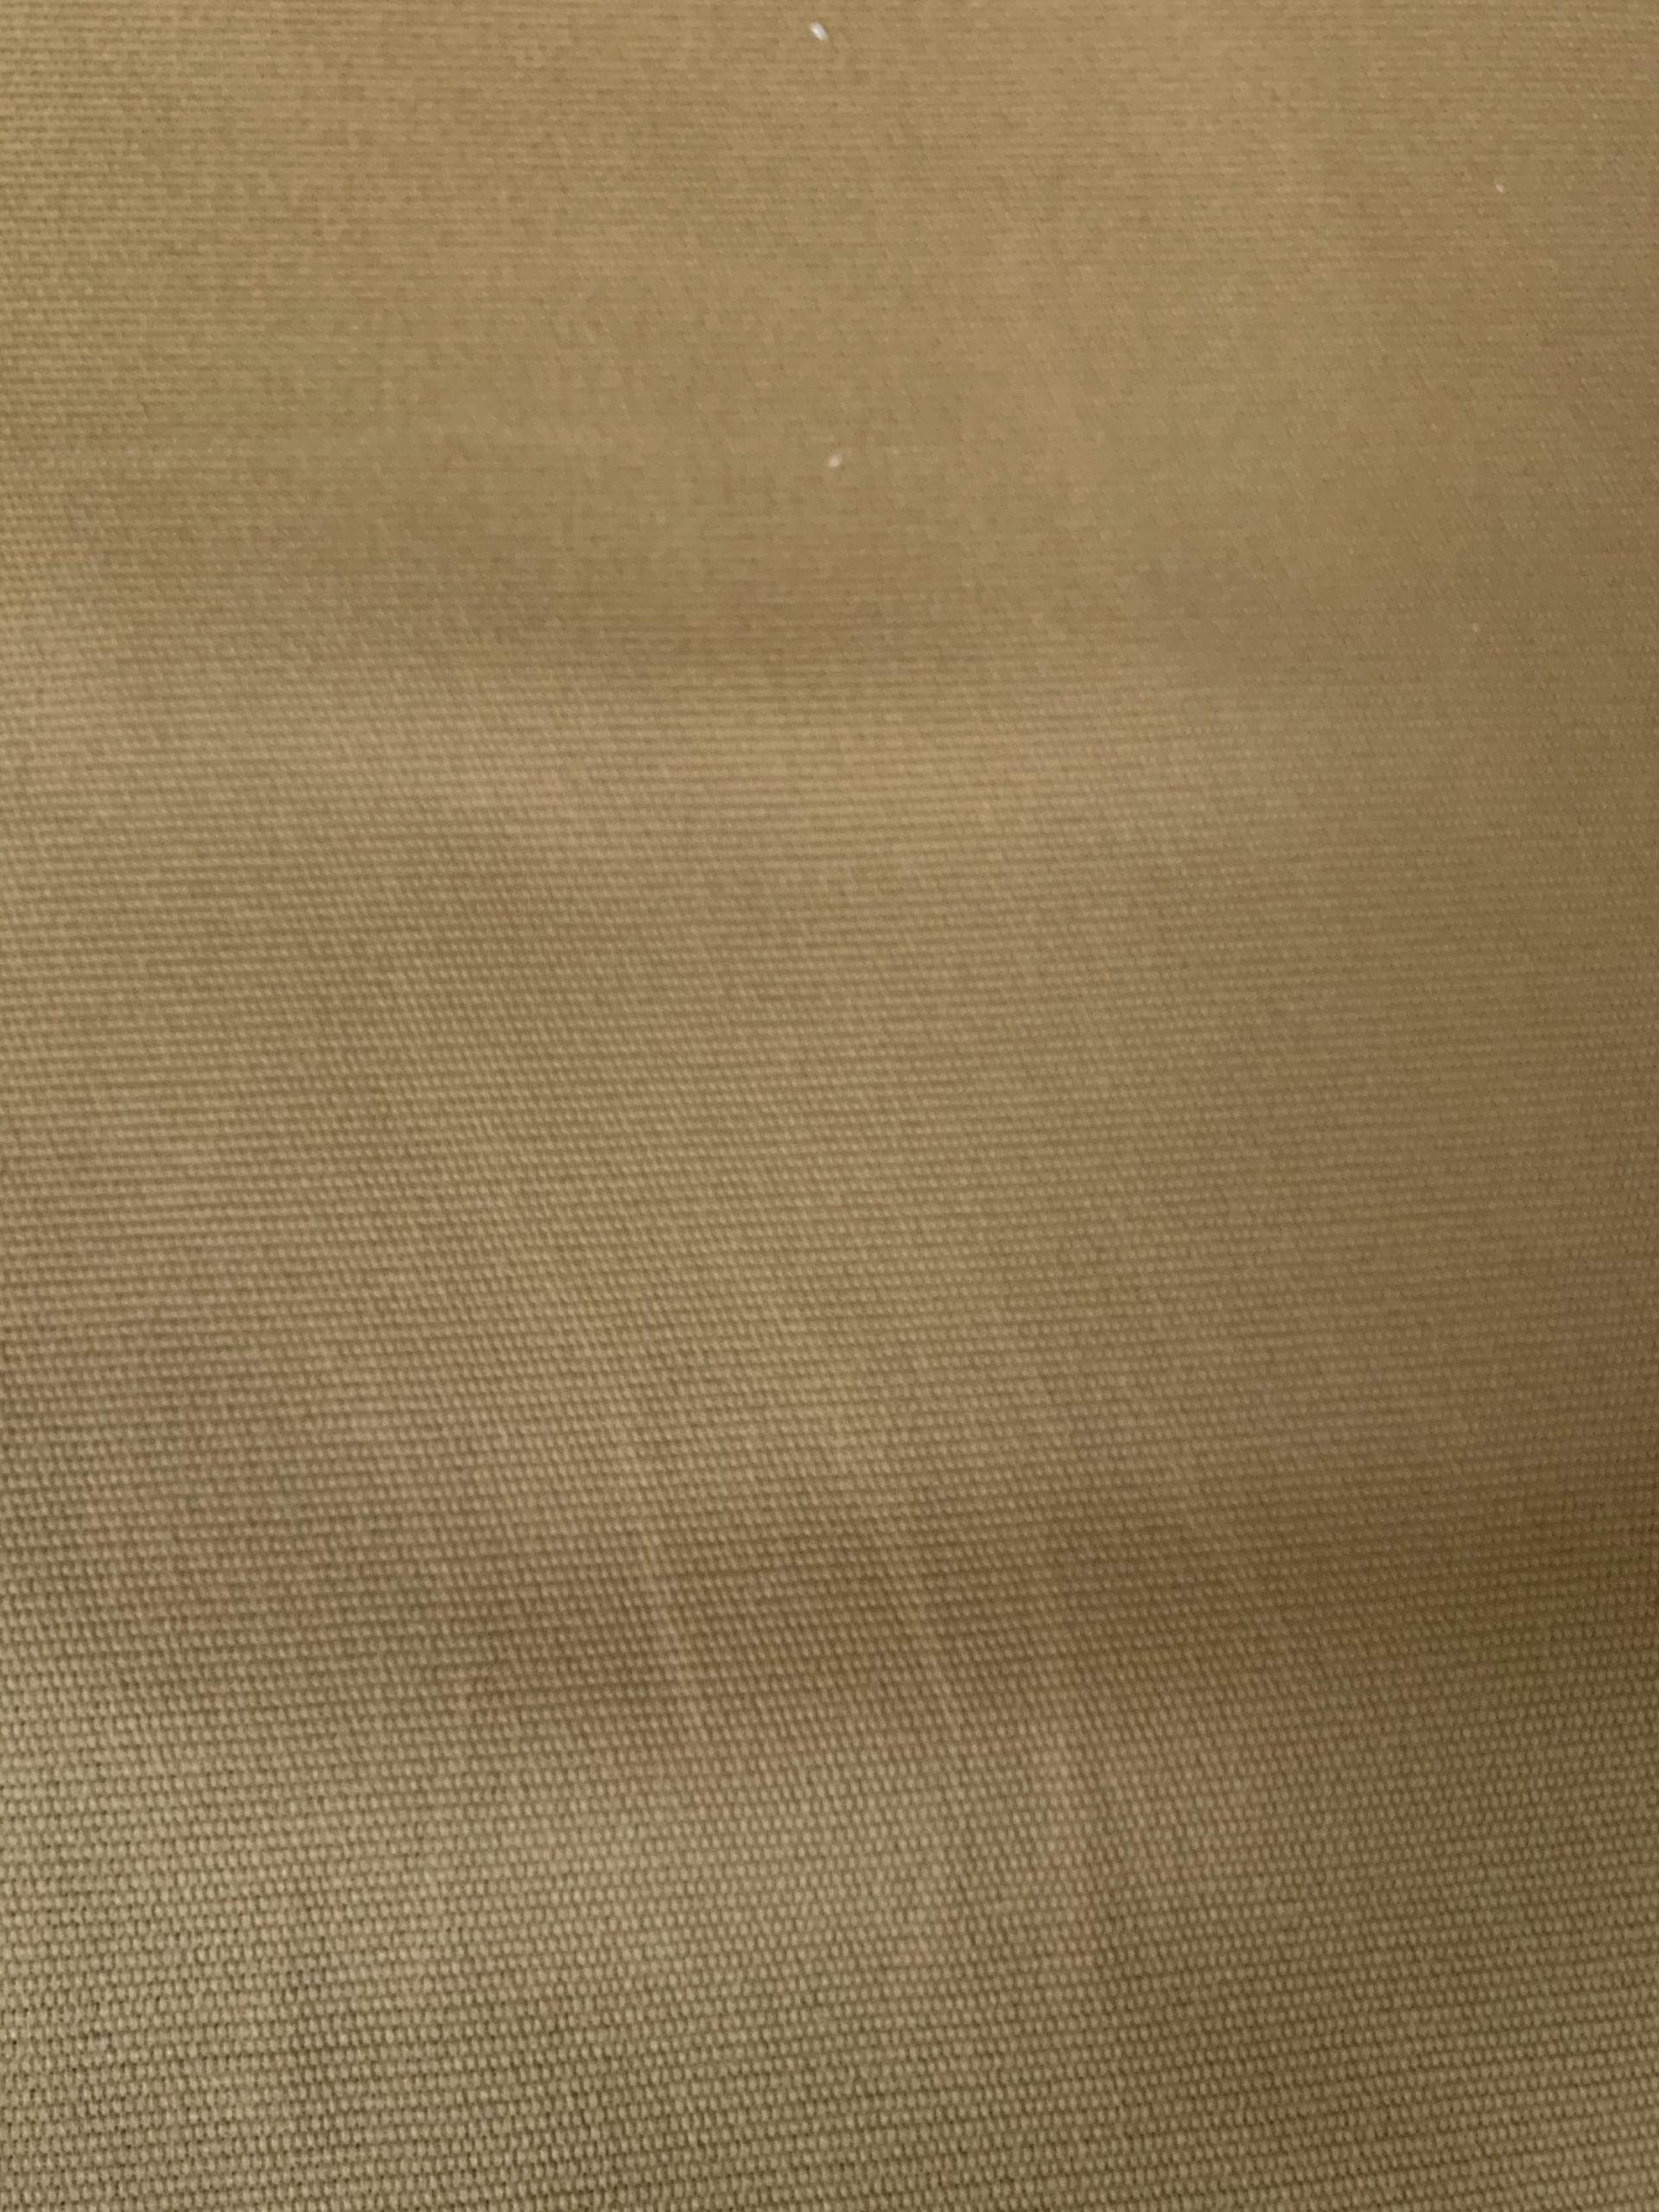 Heavy Cotton Twill Fabric, Camel, 30x56 - NikkiDesigns